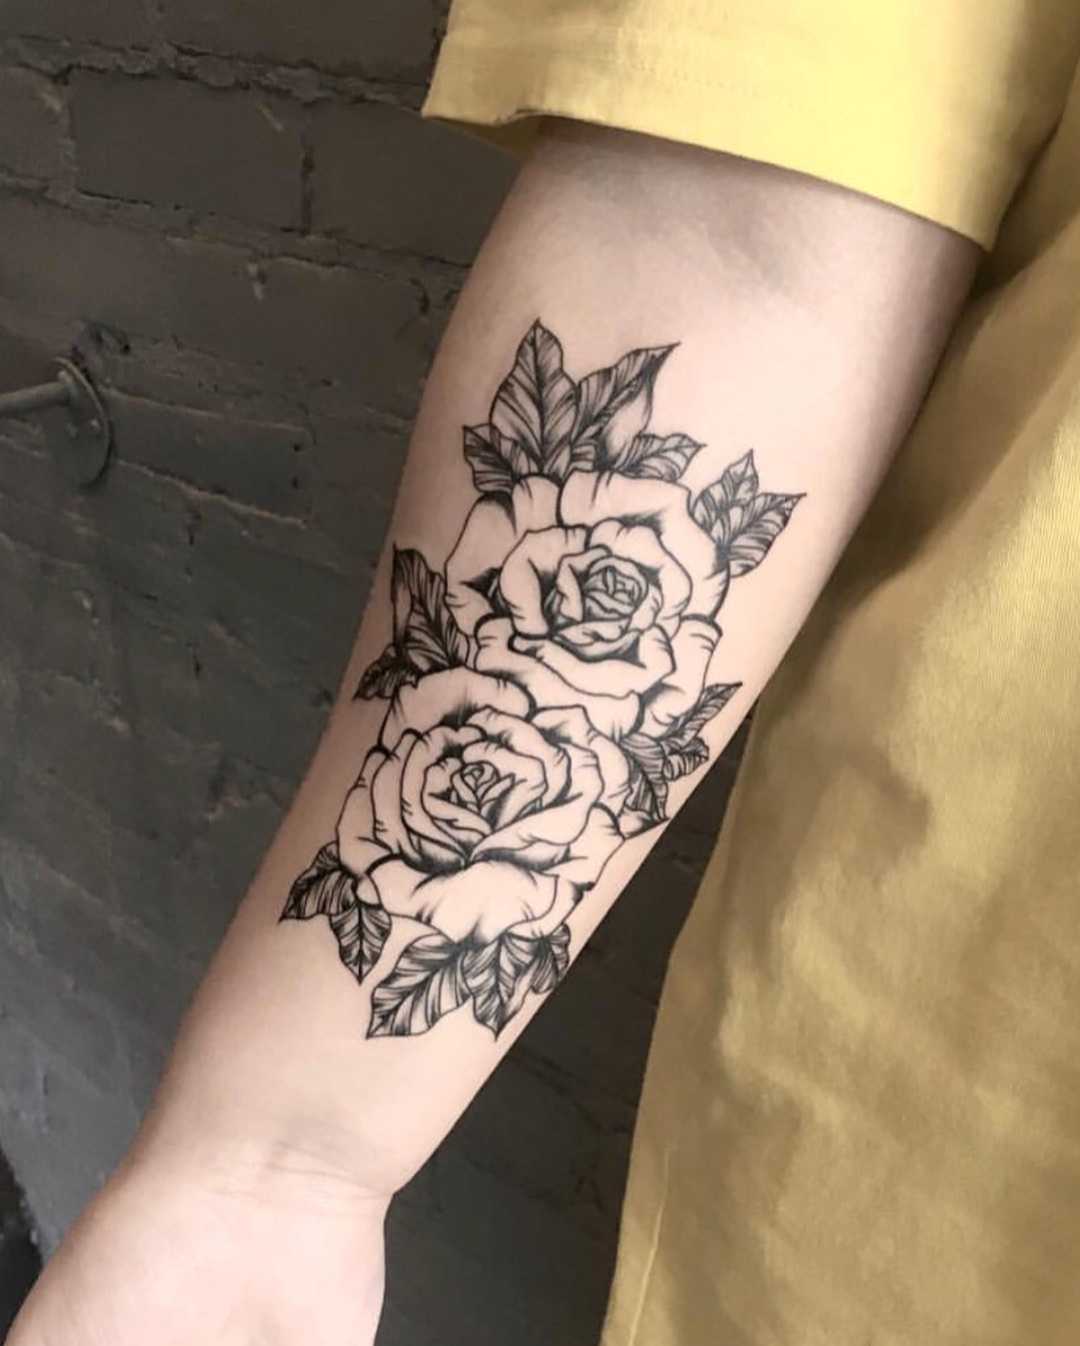 Two black roses tattoo